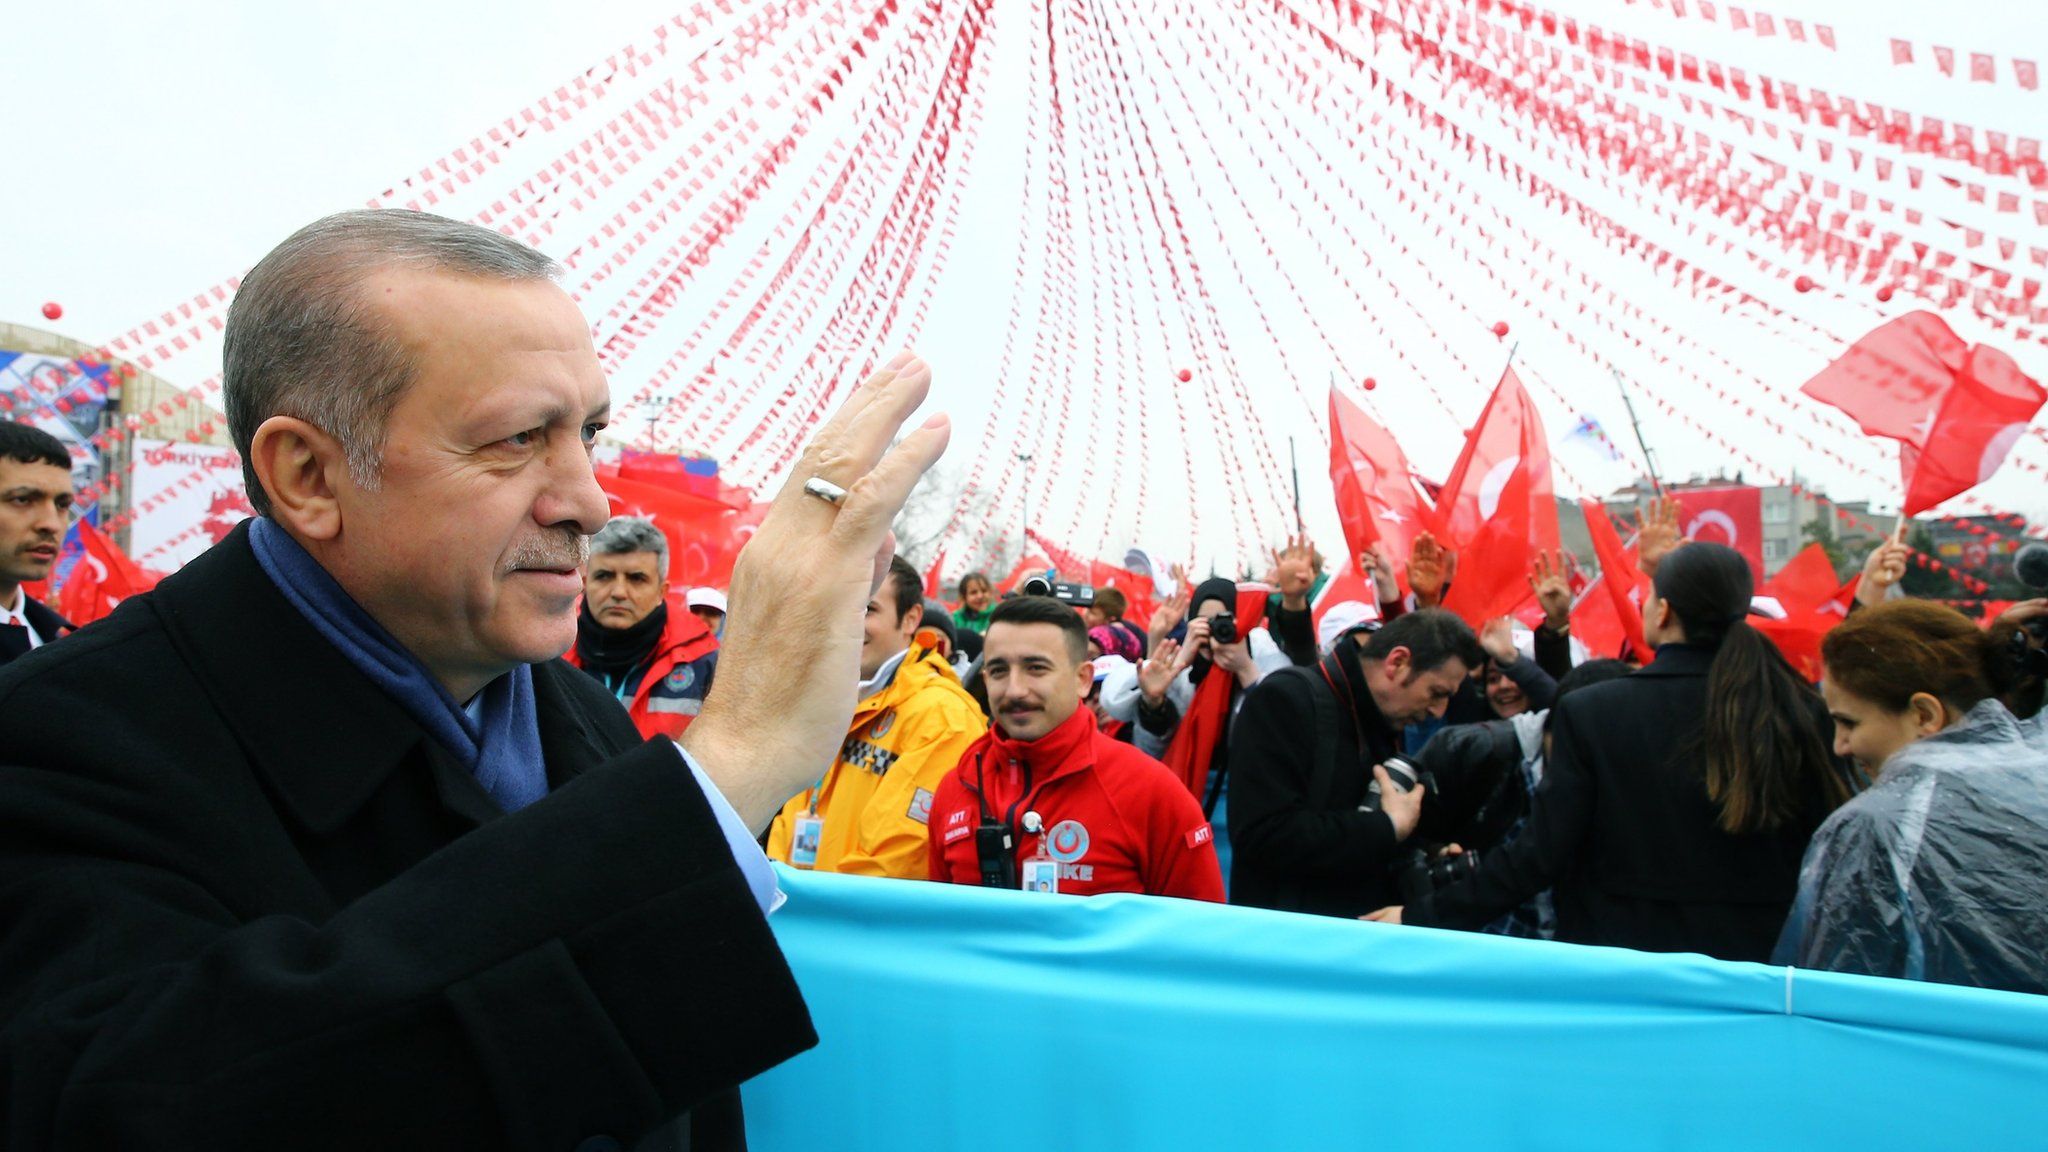 A handout photo made available by the Turkish President Press office shows Turkish President Recep Tayyip Erdogan waves to supporters during the opening ceremony for various facilities in Sakarya city, Turkey, 16 March 2017